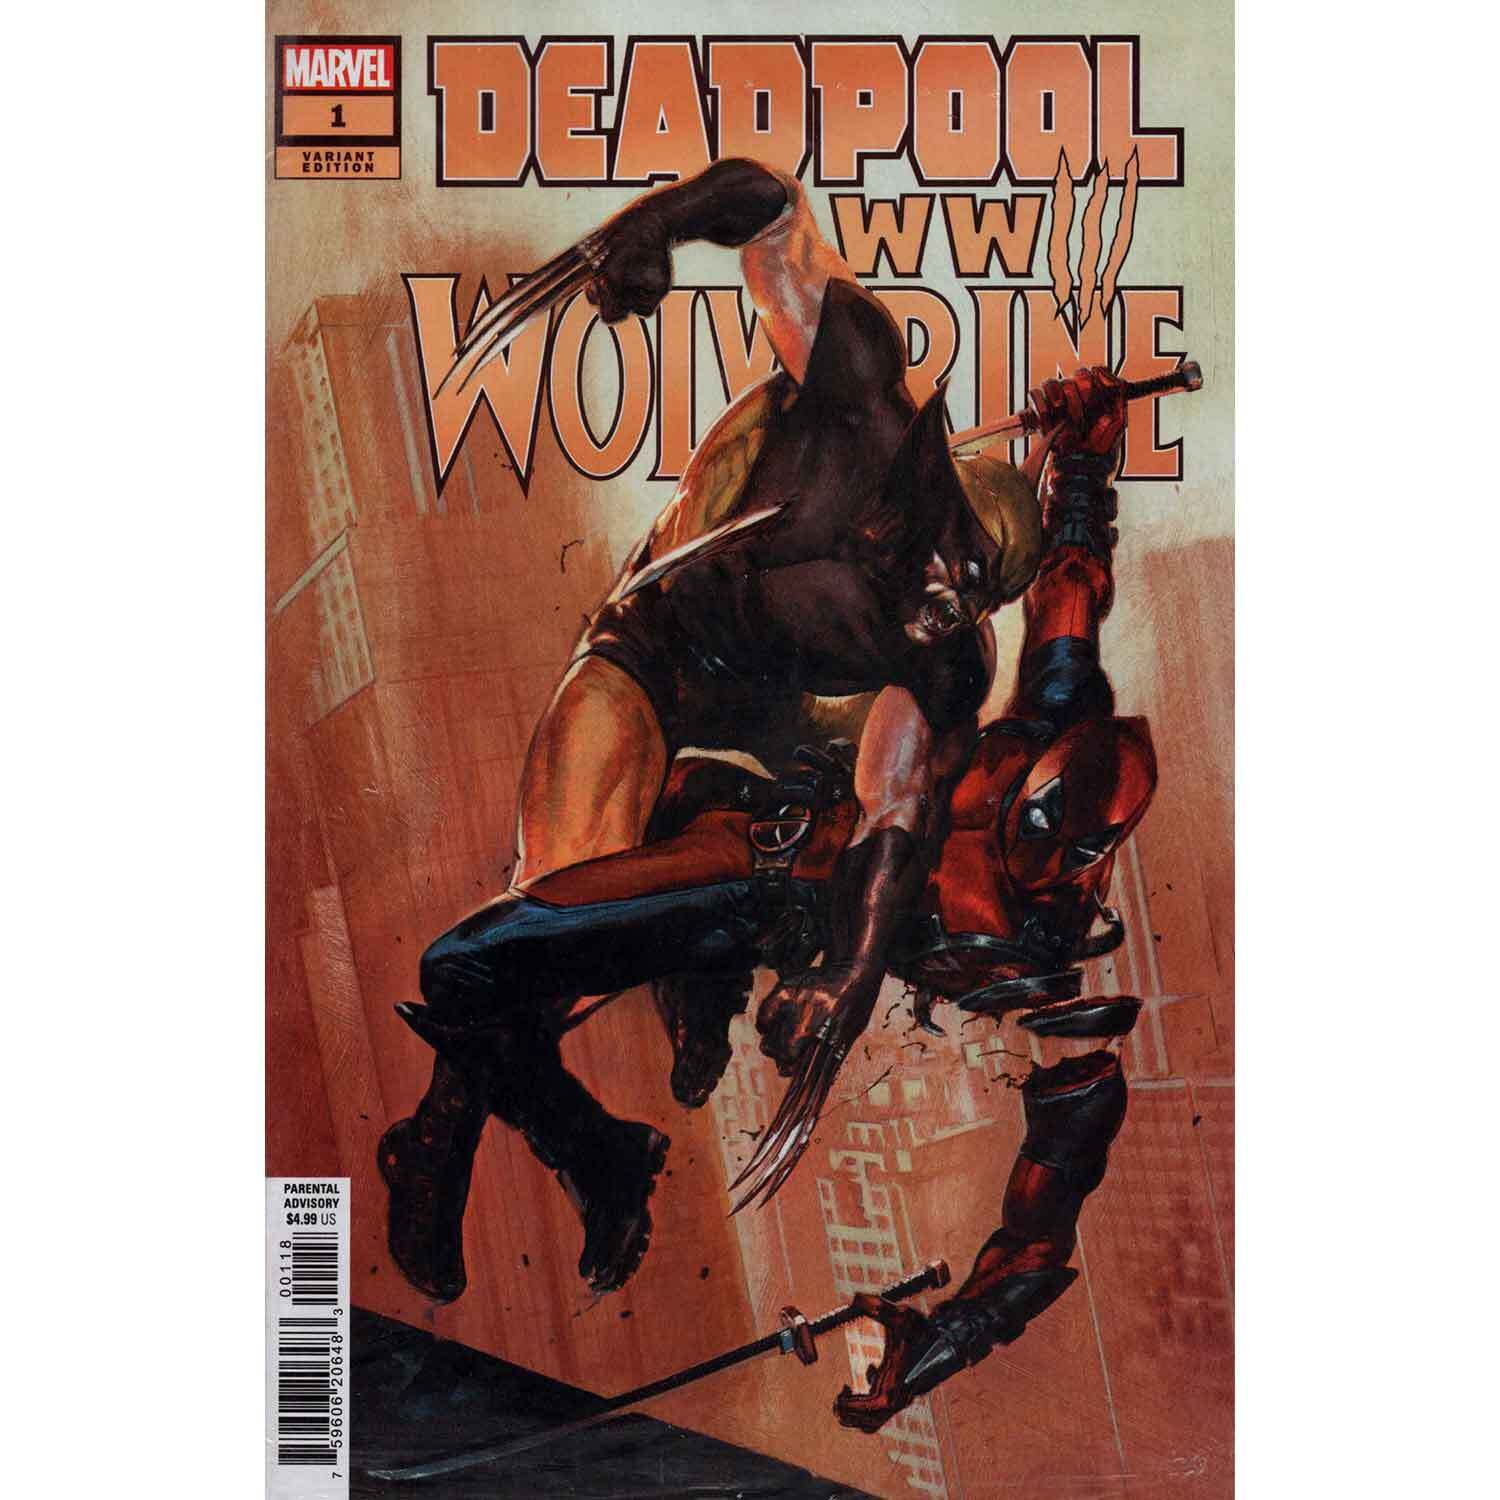 Deadpool Wolverine WWIII #1 Dellotto Surprise Brown Costume Pollybagged Variant